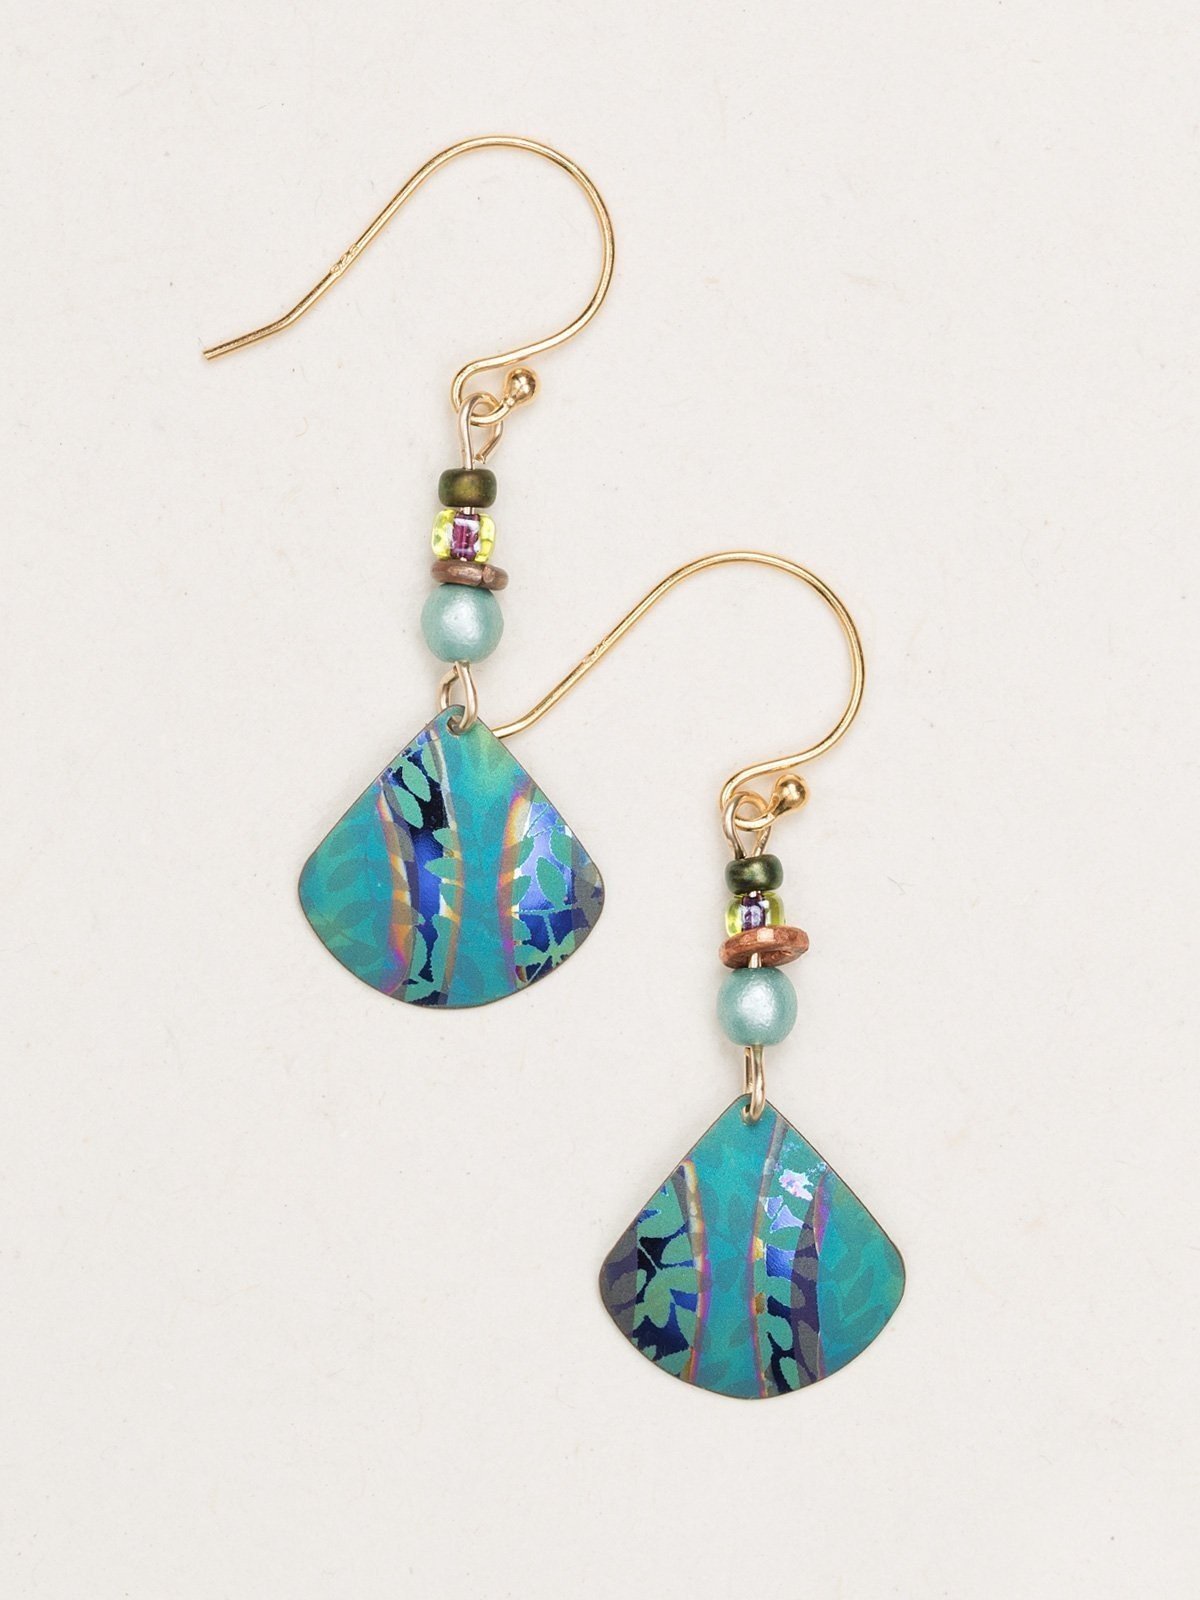 Teal painterly earrings by Holly Yashi